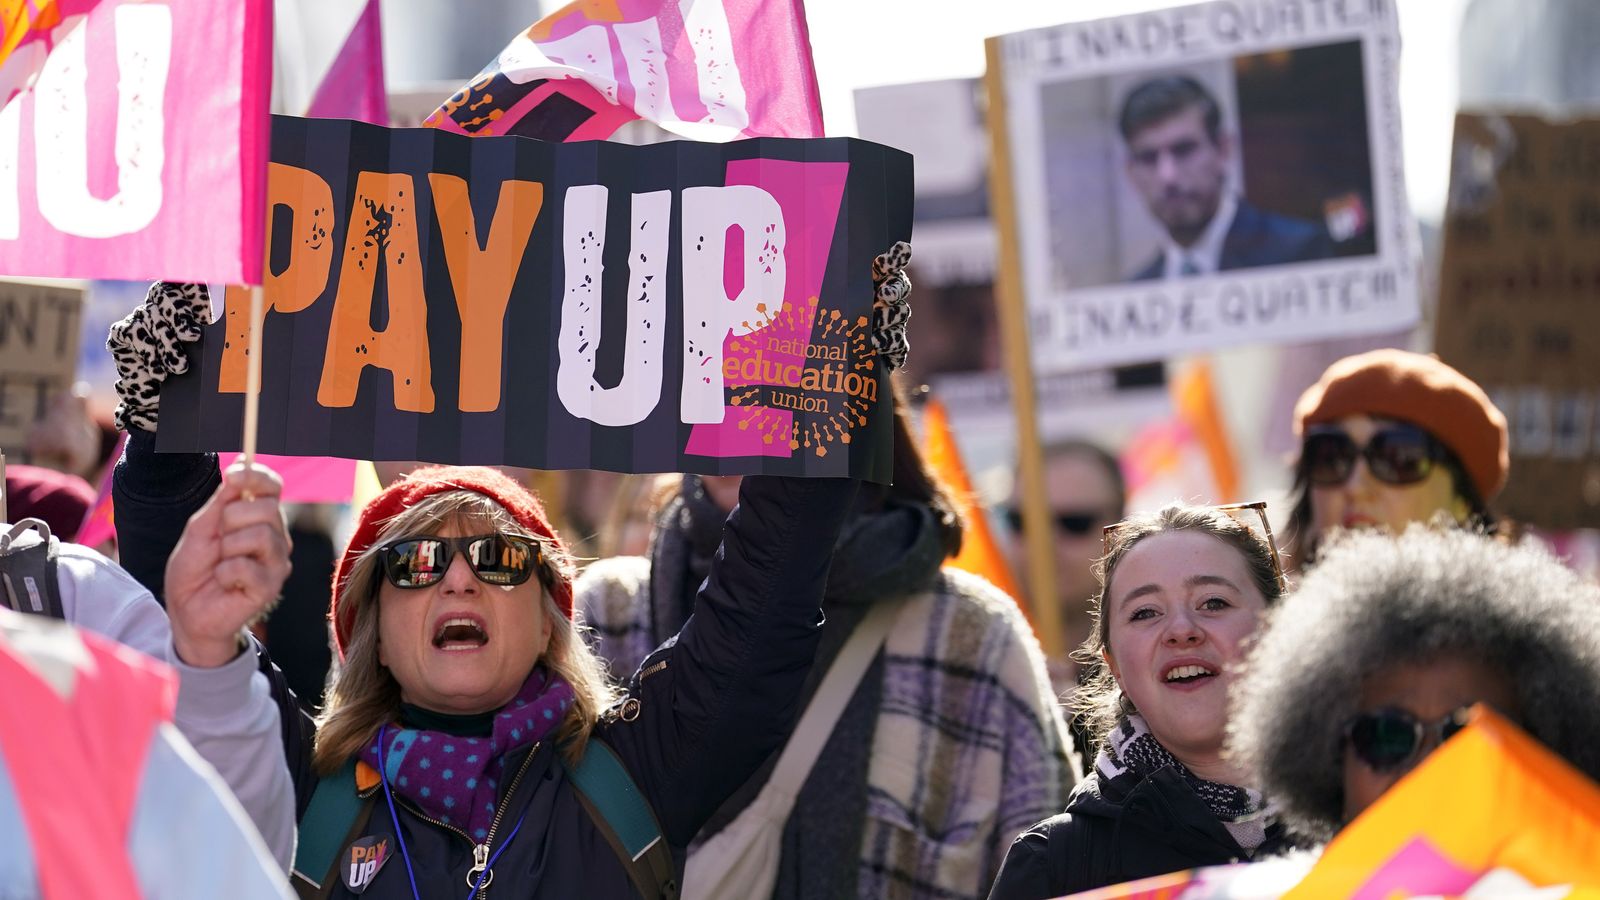 Millions of UK public sector workers including teachers and doctors to get pay rises